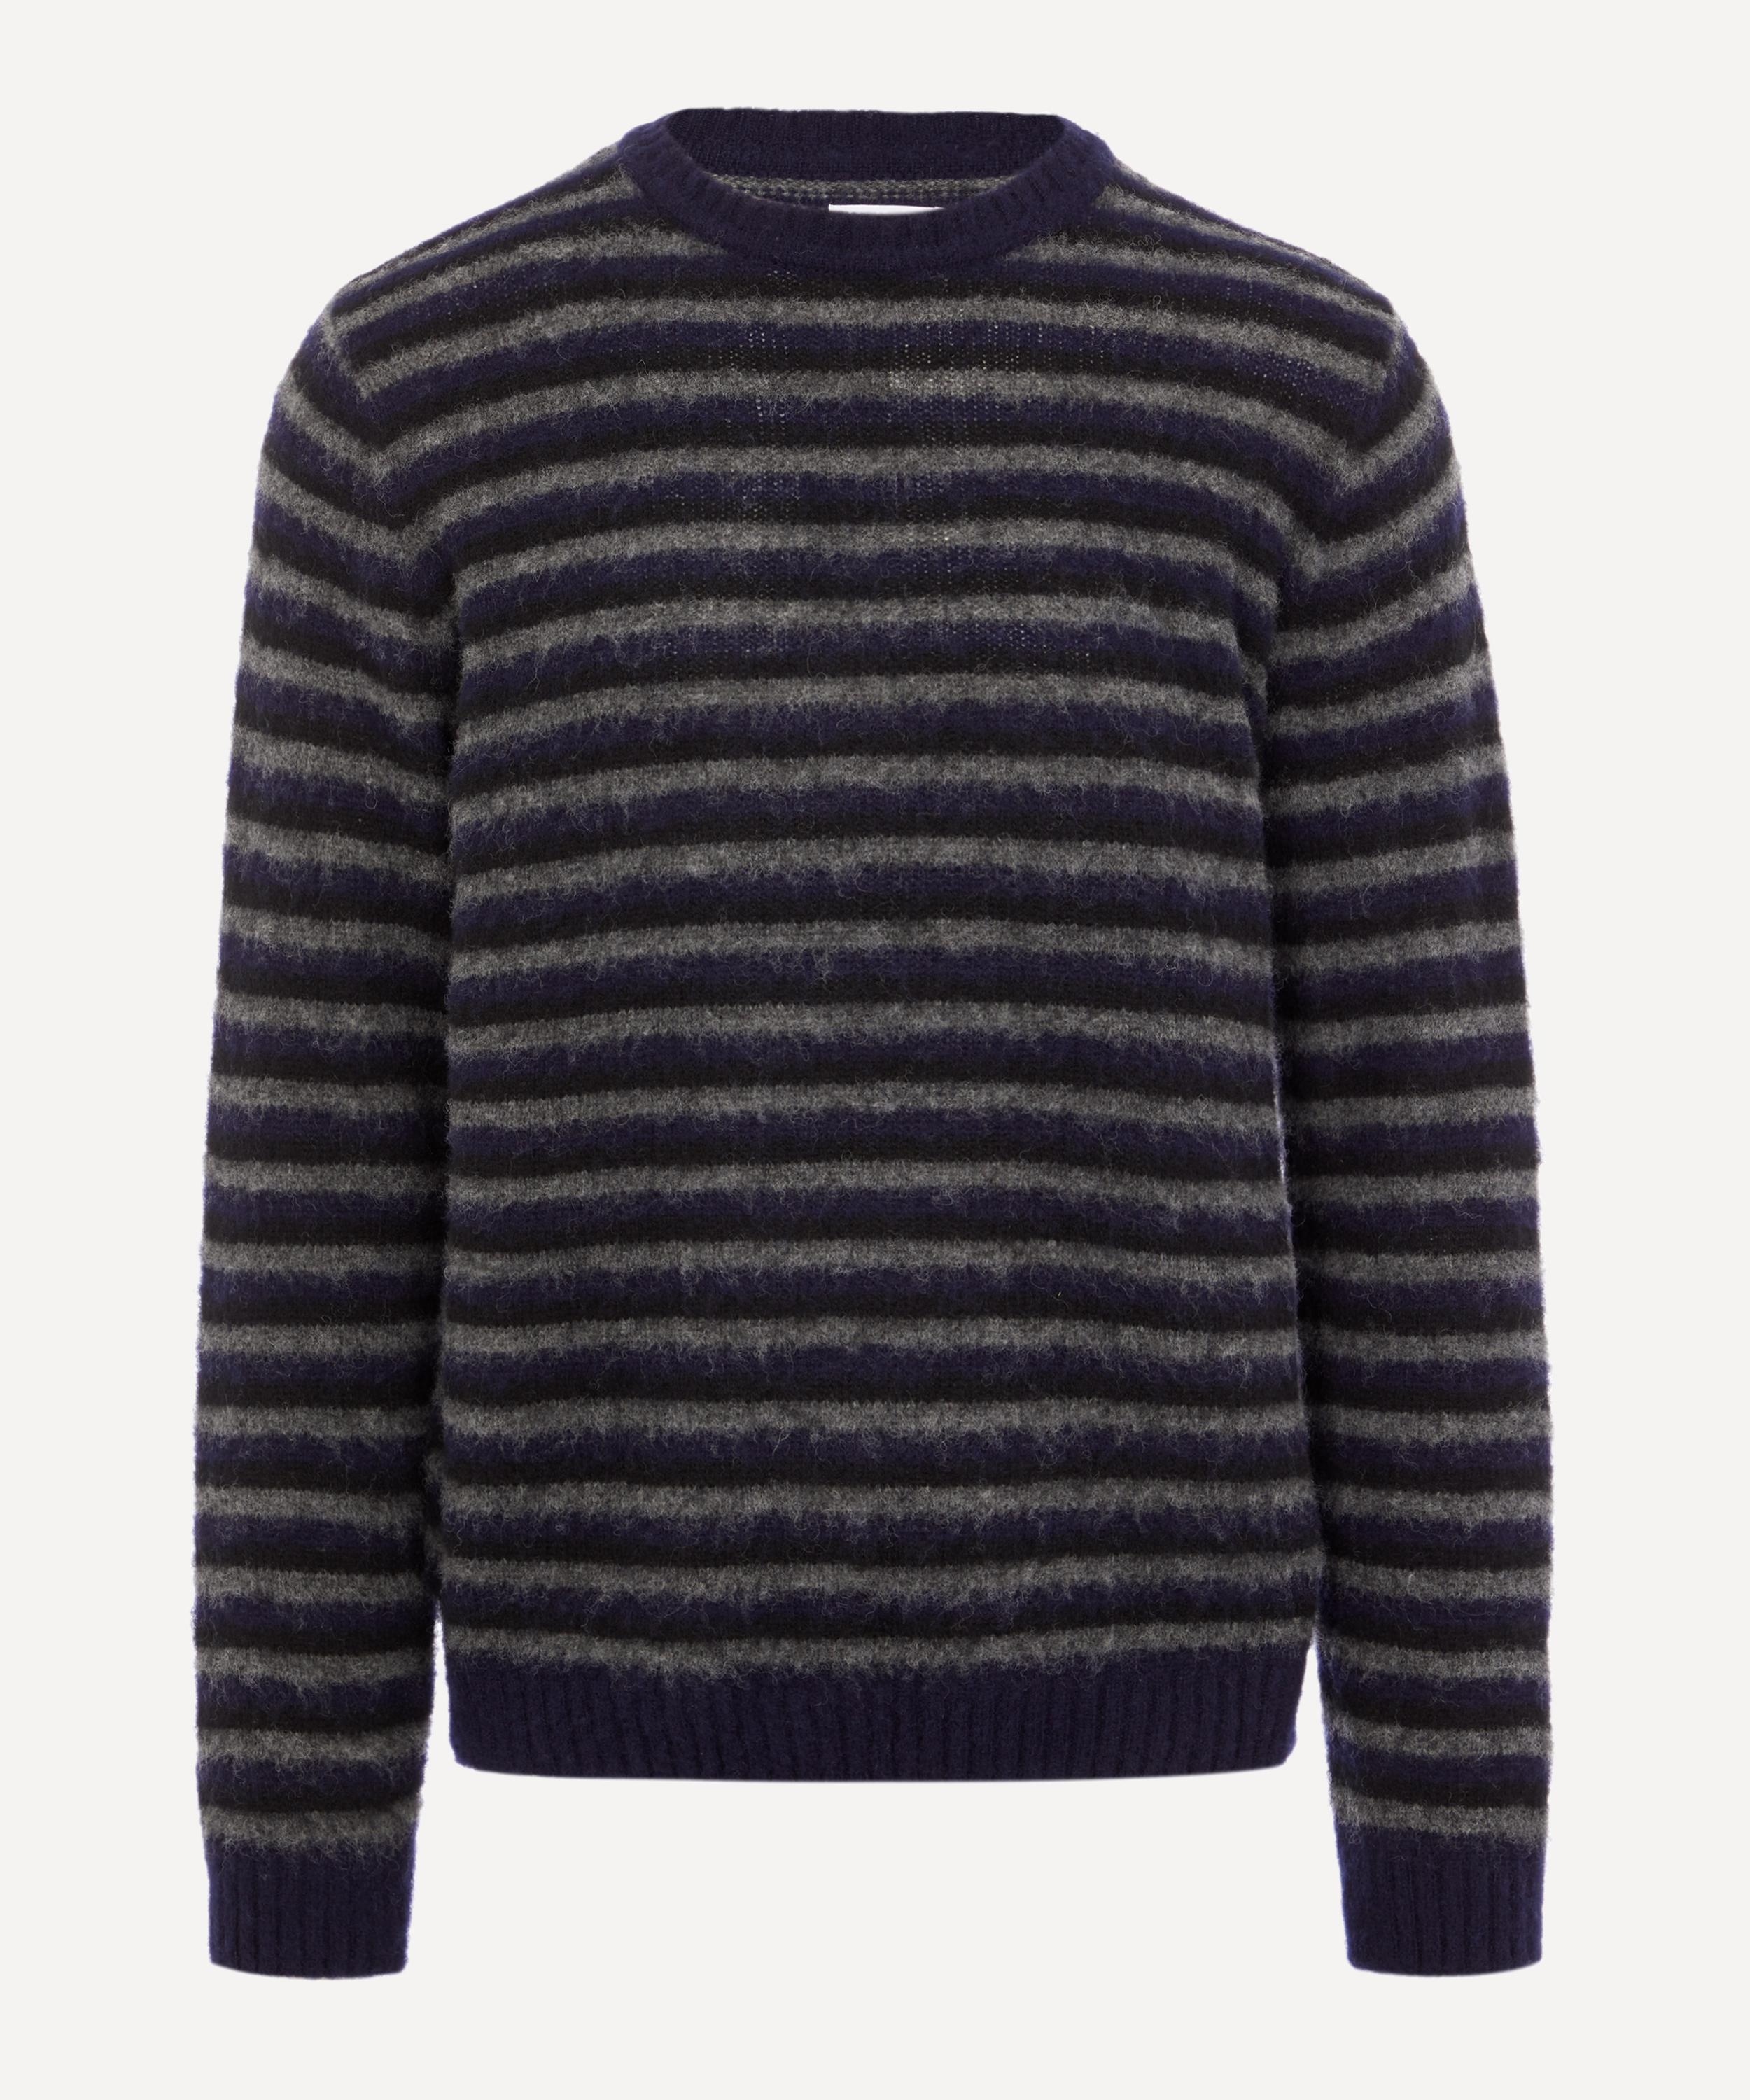 NORSE PROJECTS SIGFRED BRUSHED STRIPE KNIT,000637238